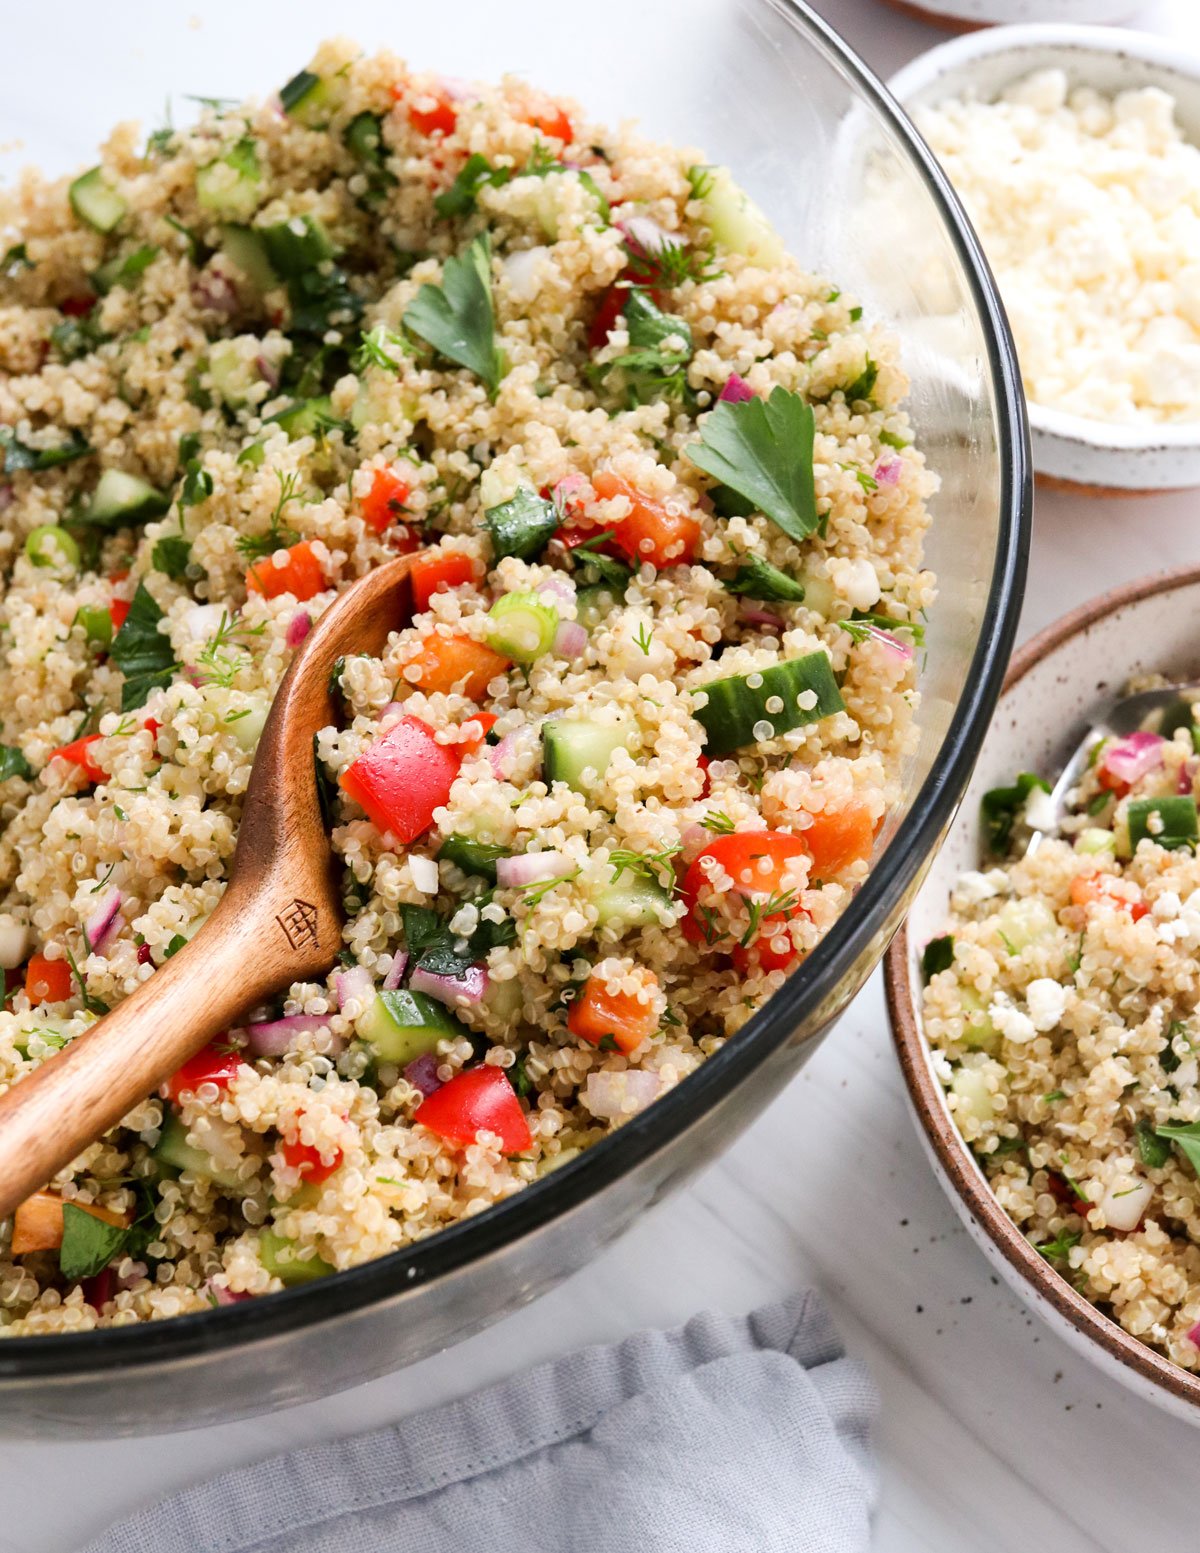 Quinoa salad in large glass serving bowl with spoon.